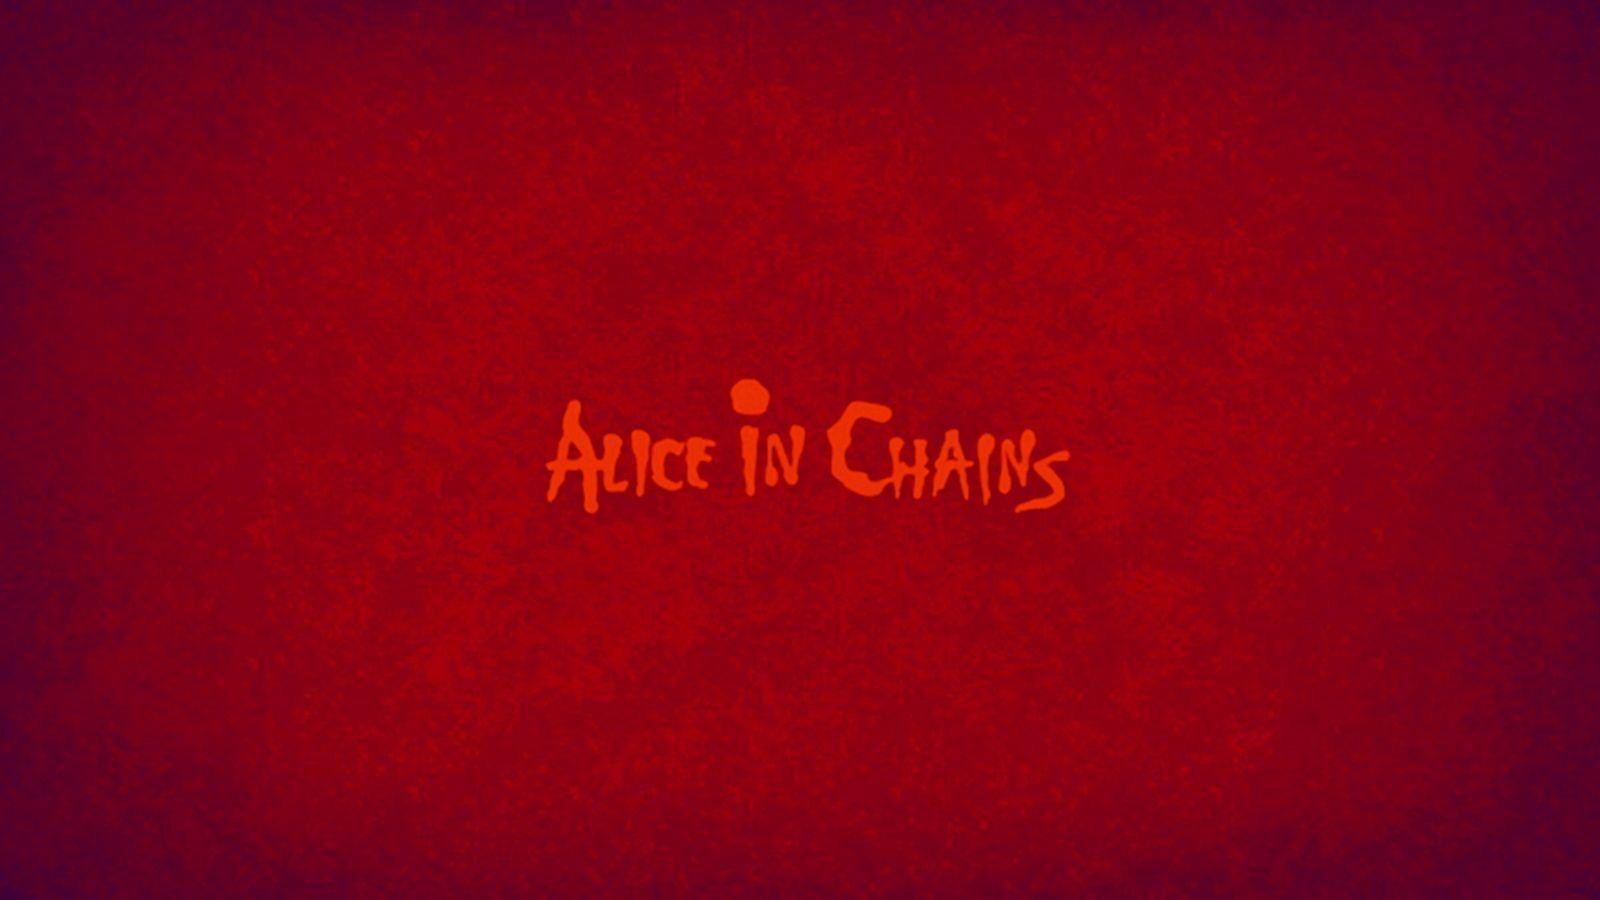 Best 58+ Alice in Chains Wallpapers on HipWallpapers.